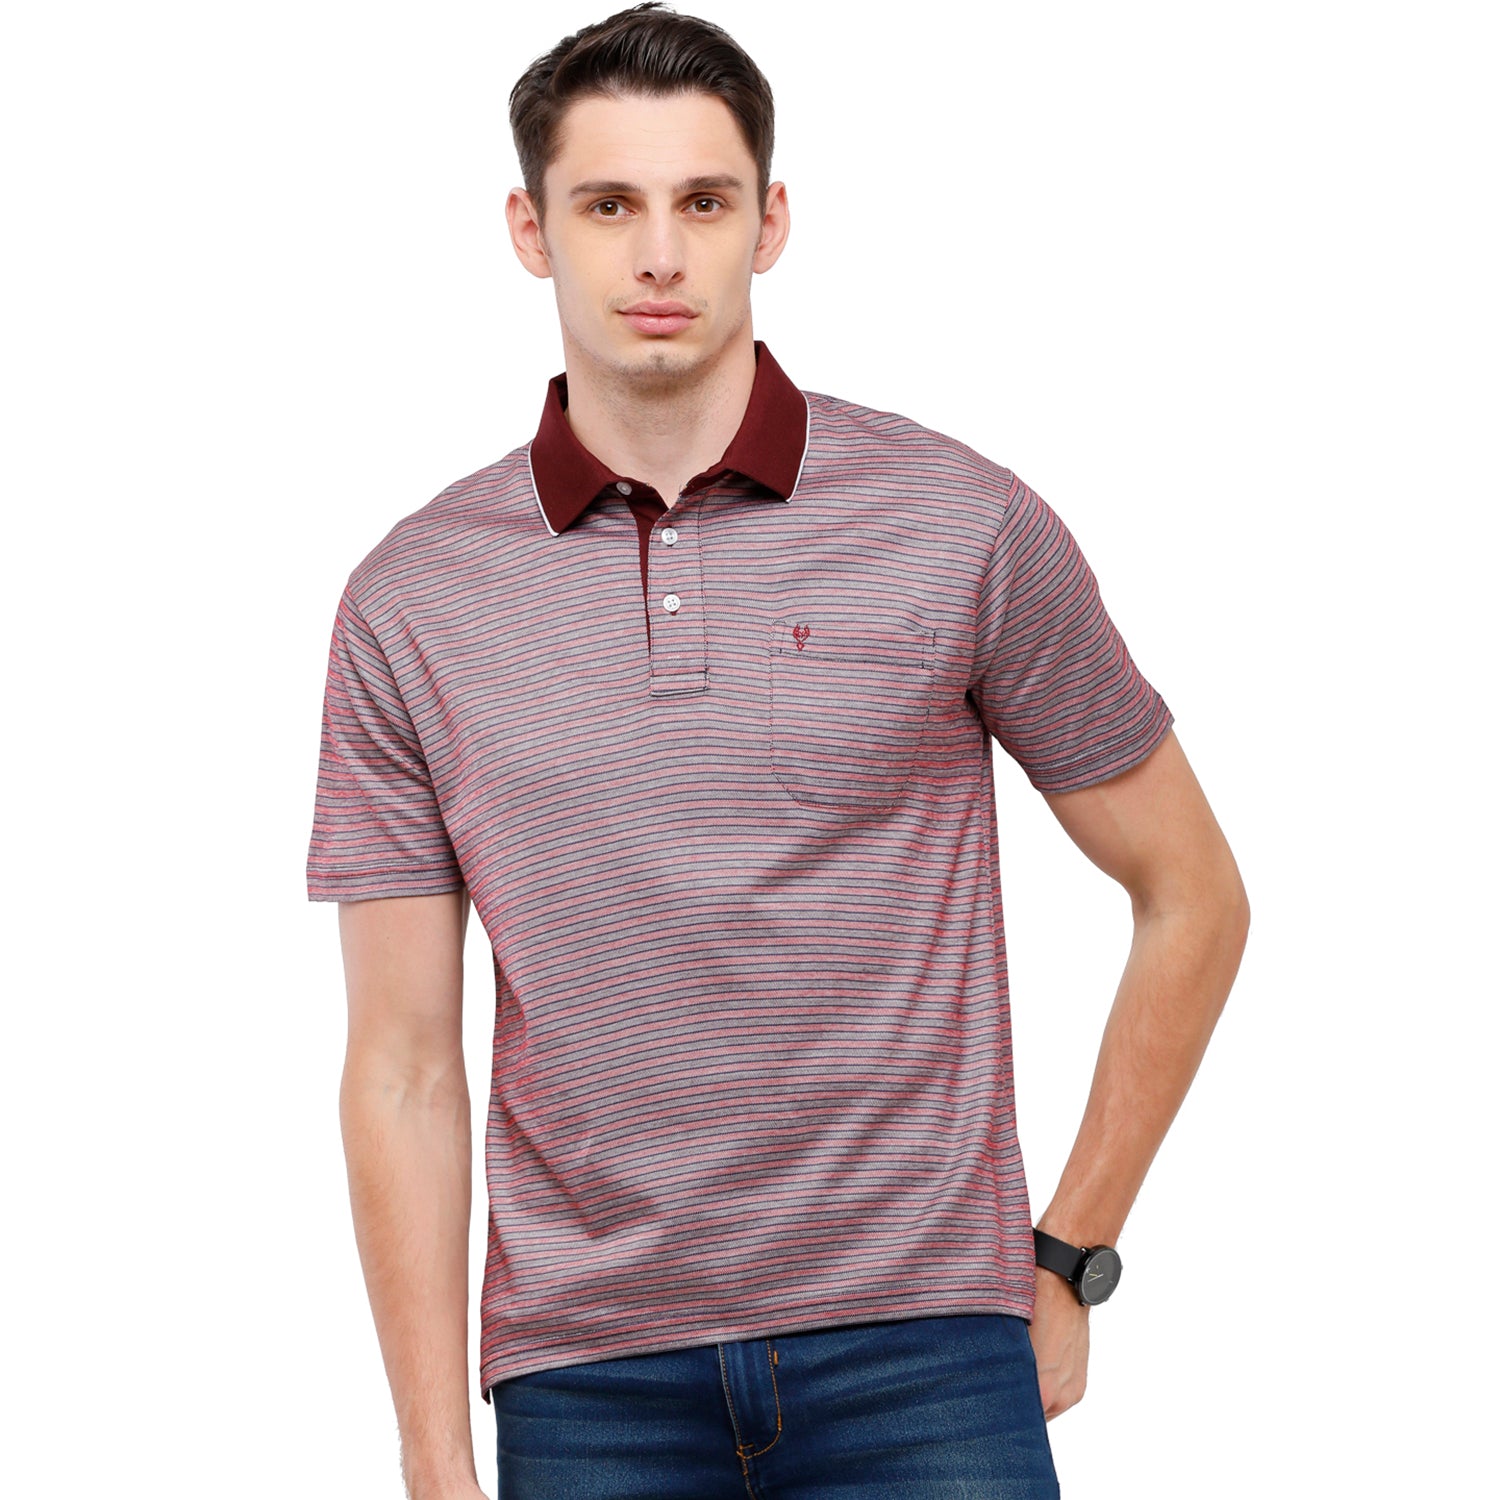 Classic Polo Men's Striped Authentic Fit Half Sleeve Premium Maroon Pink Stripe T-Shirt - Ultimo - 263 B T-shirt Classic Polo 